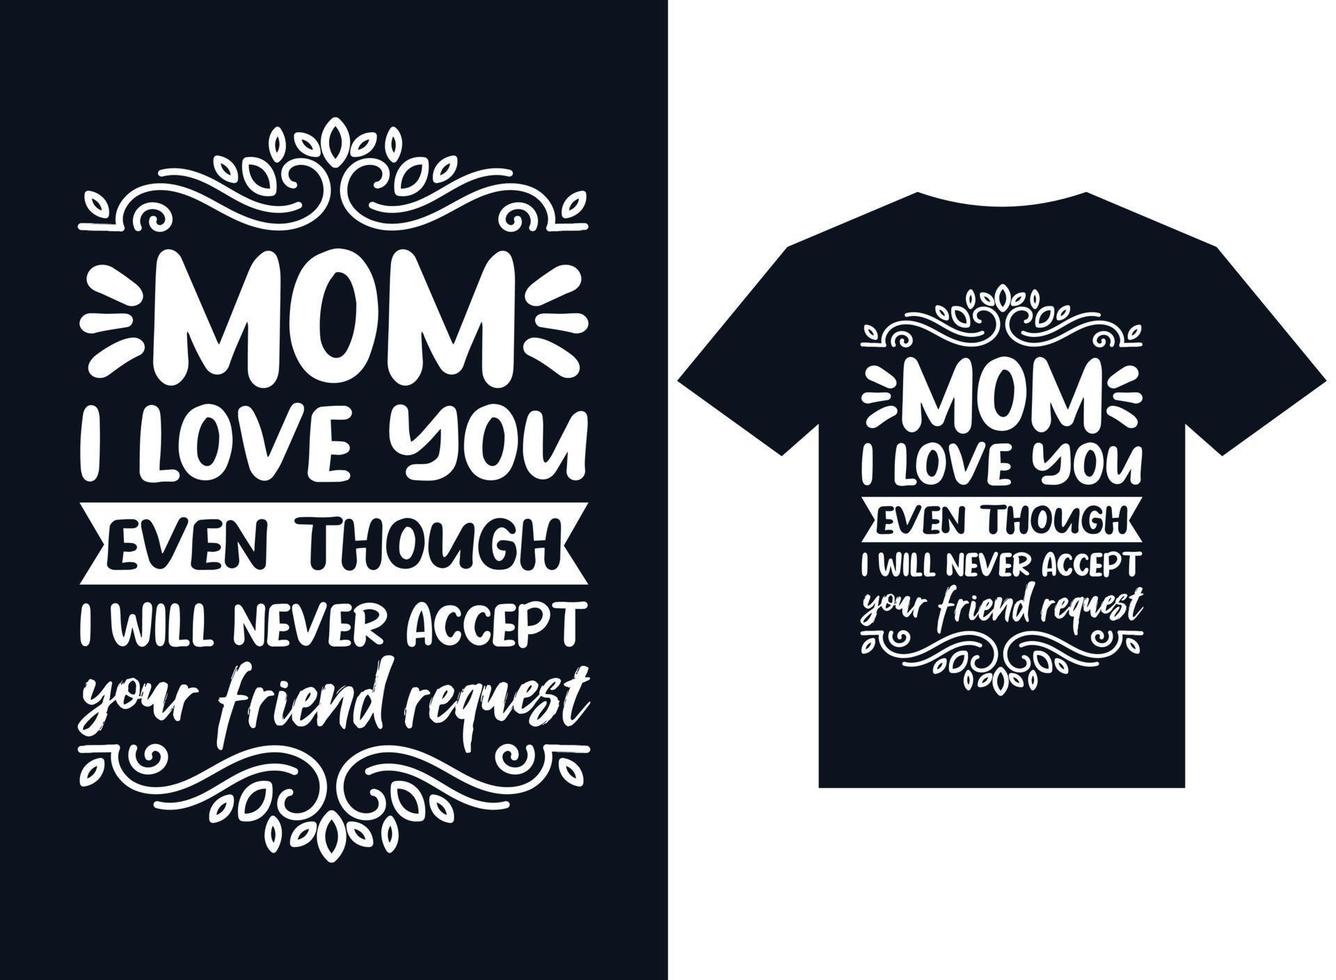 mom, i love you even though i will never accept your friend request t-shirt design vector